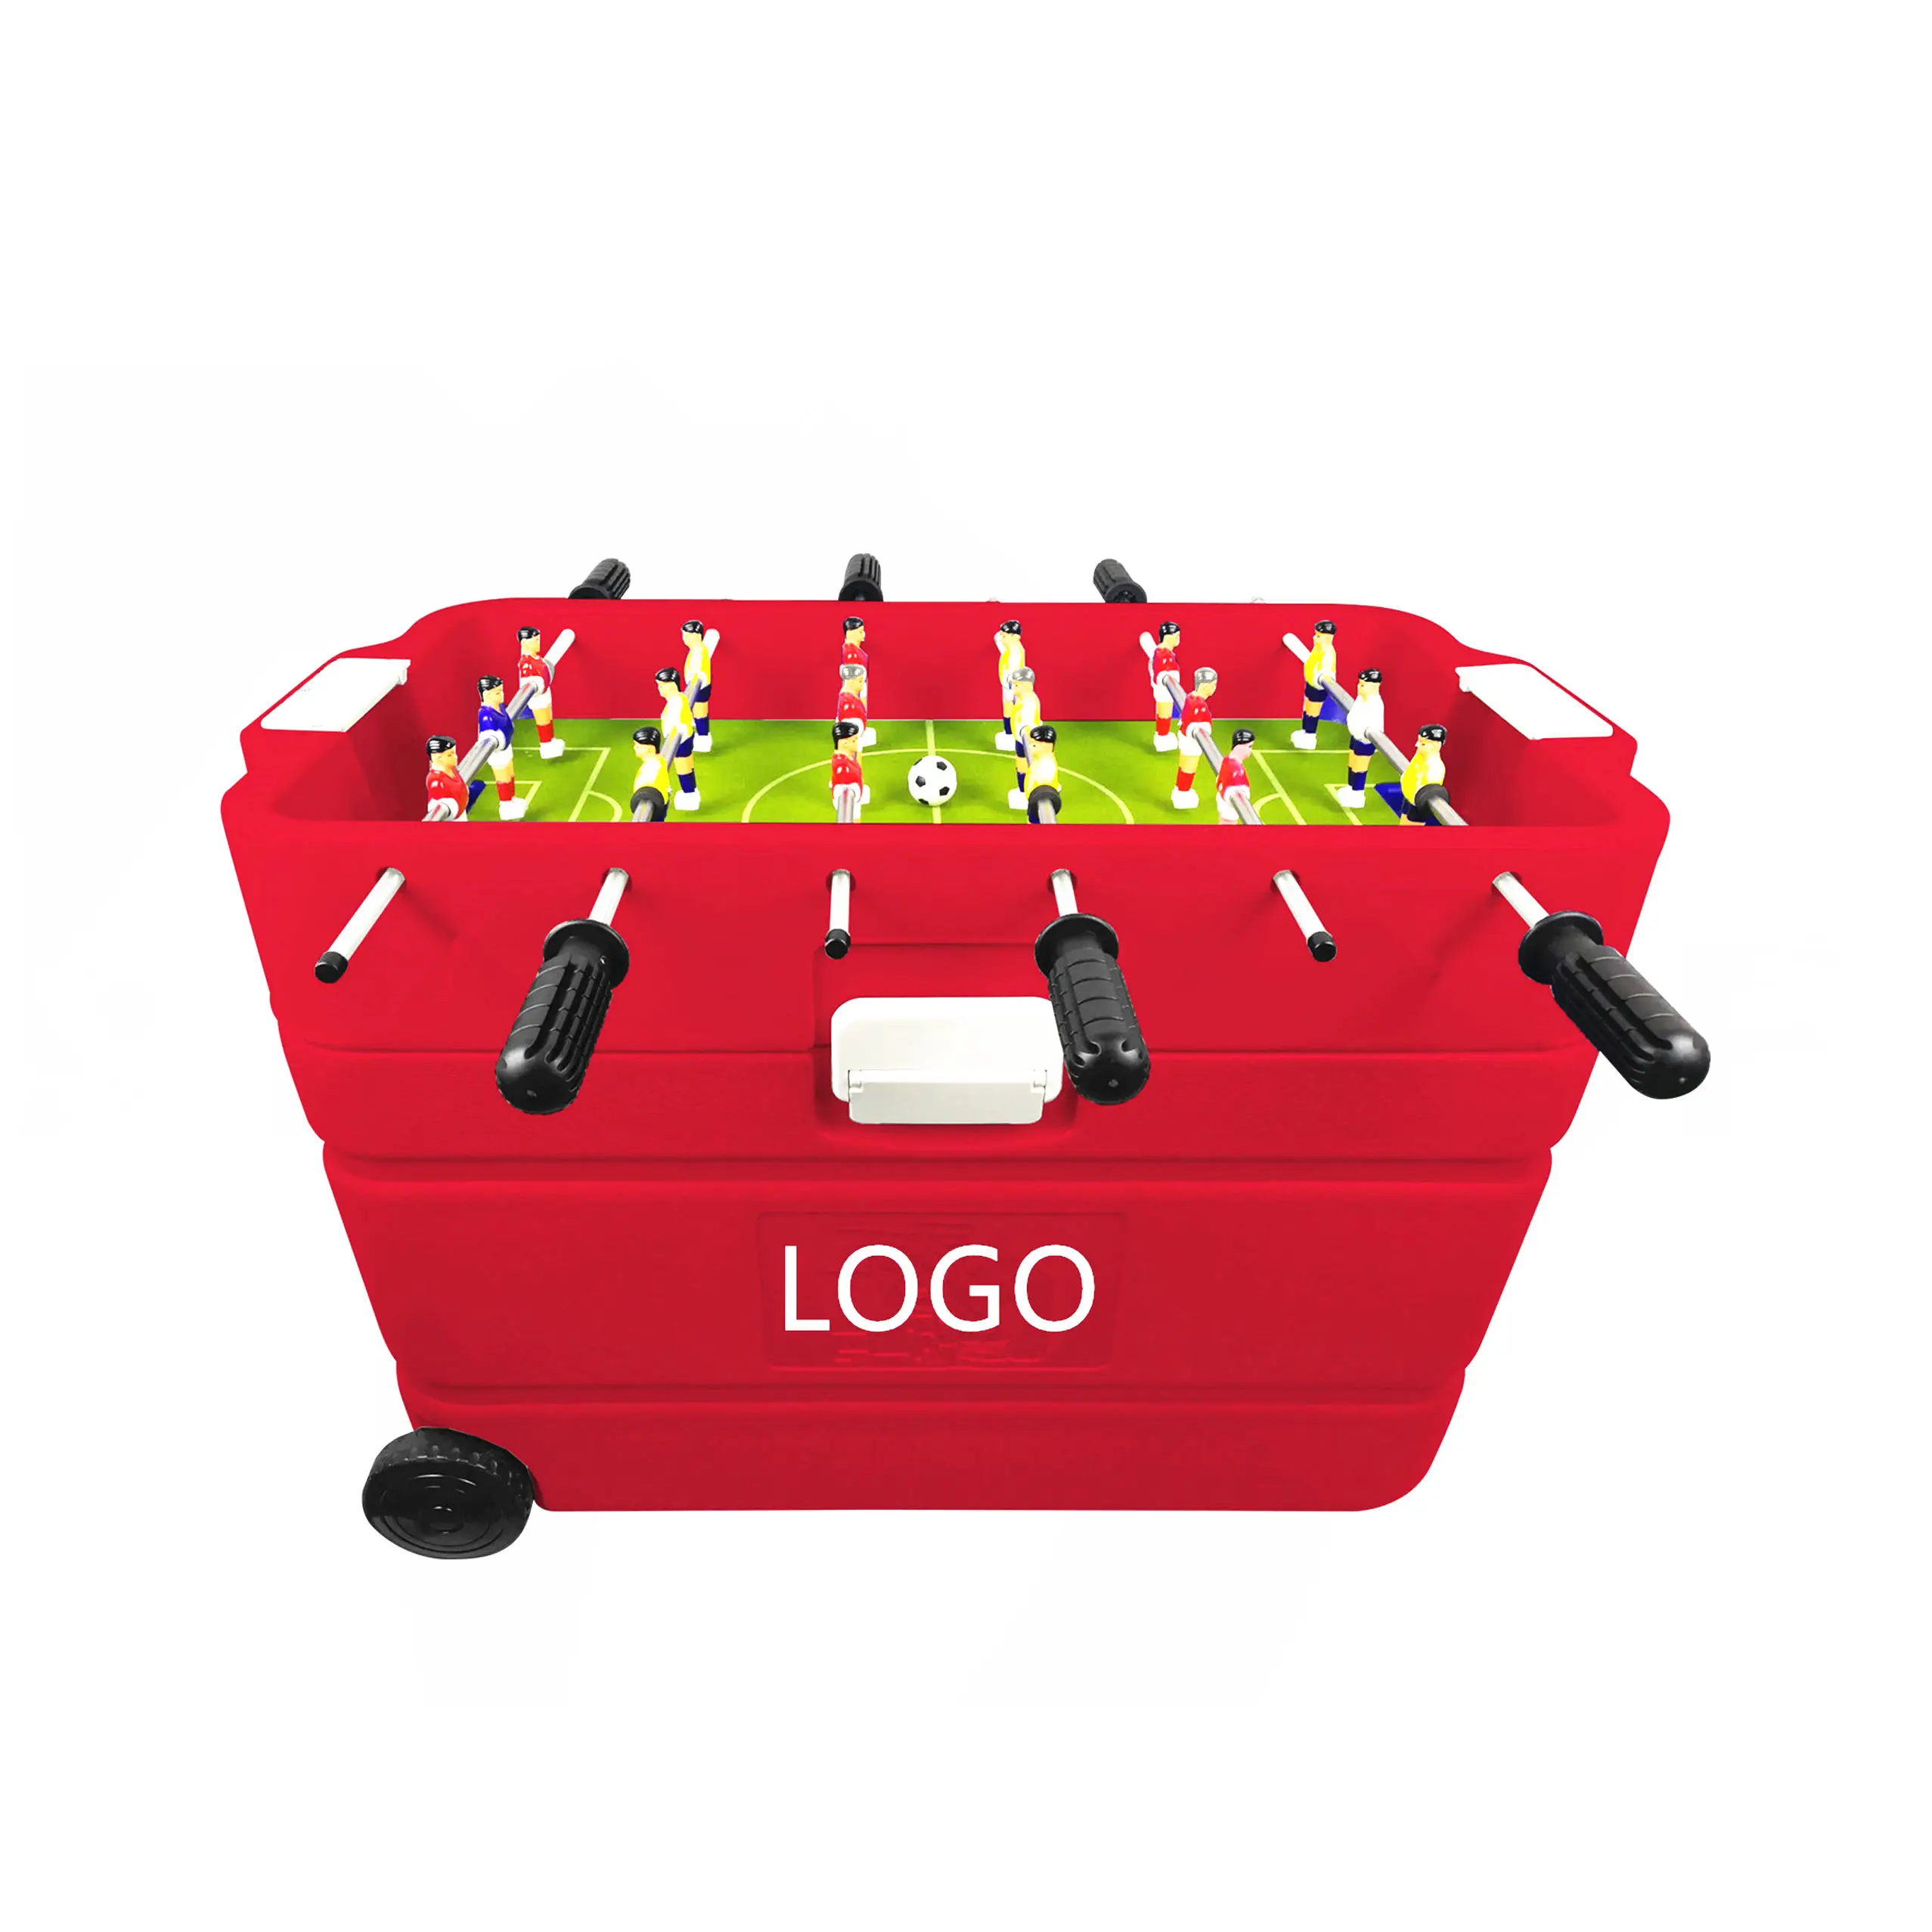 Home Compact Plastic 60L Red Cooler Box With Mini Foosball Soccer Table Game For Family Party Indoor and outdoor